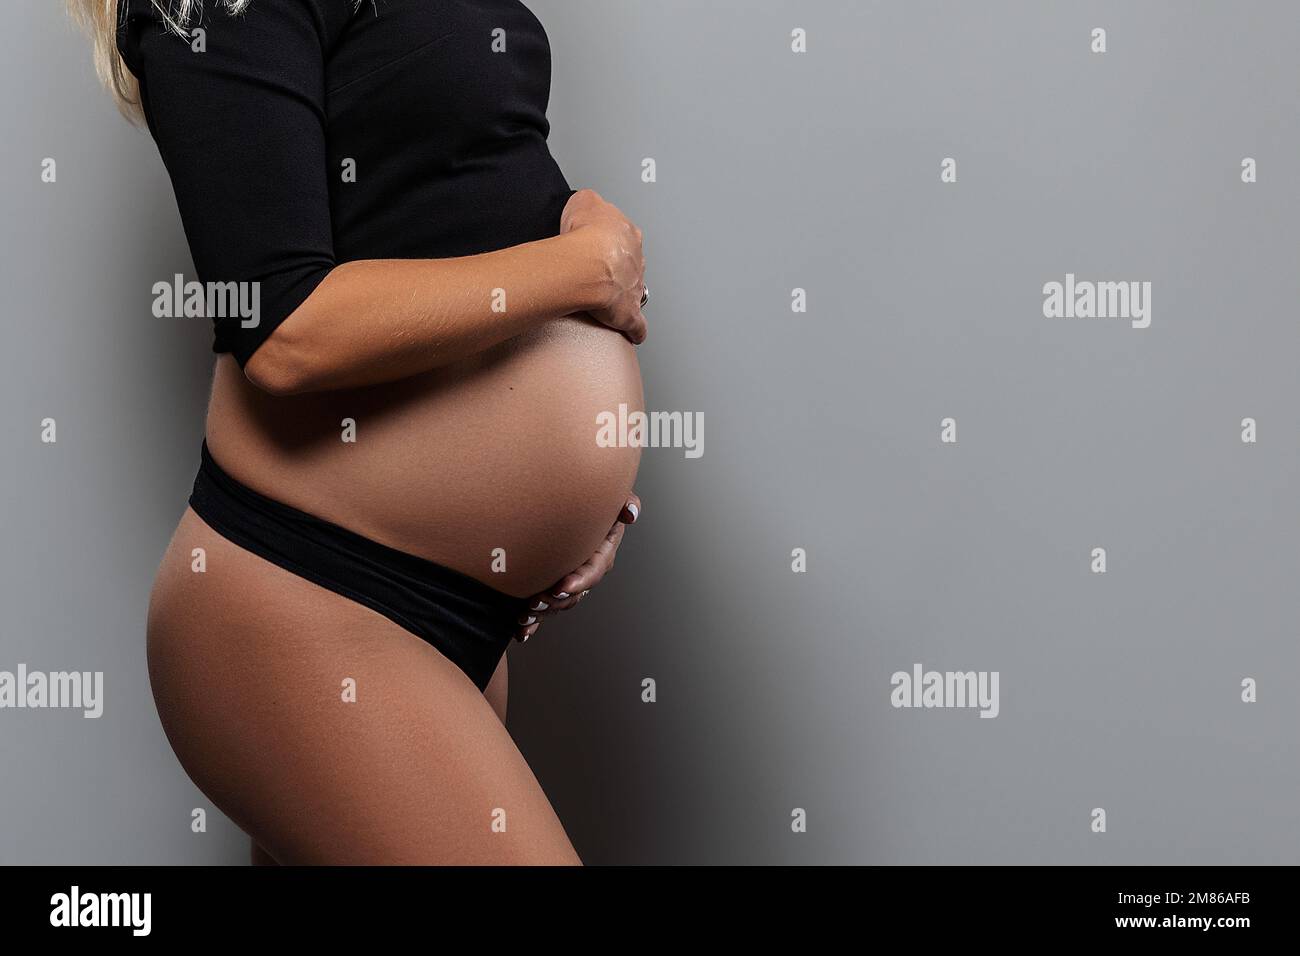 A pregnant woman holds her hands on her stomach on a gray background. Pregnancy, maternity, preparation and expectation concept. Stock Photo